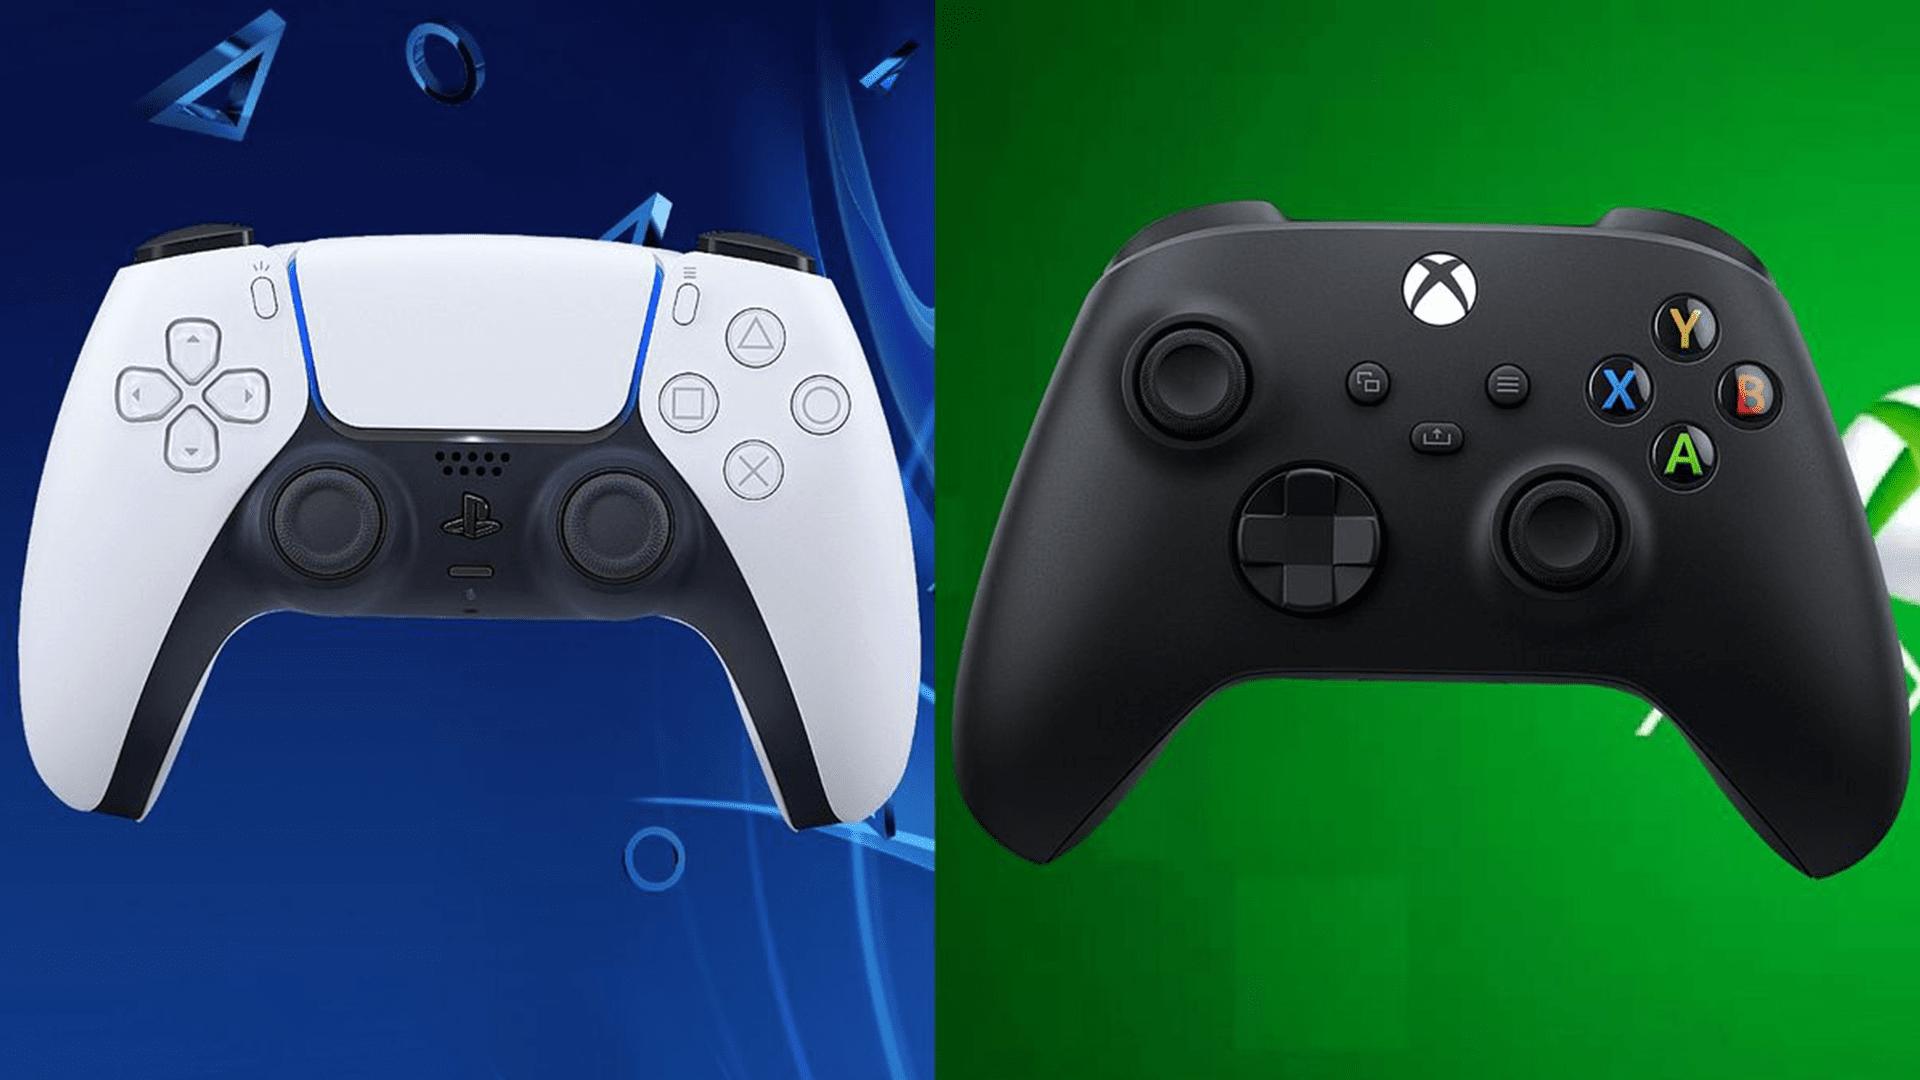 The PlayStation 5 and Xbox Series X/S gamepads